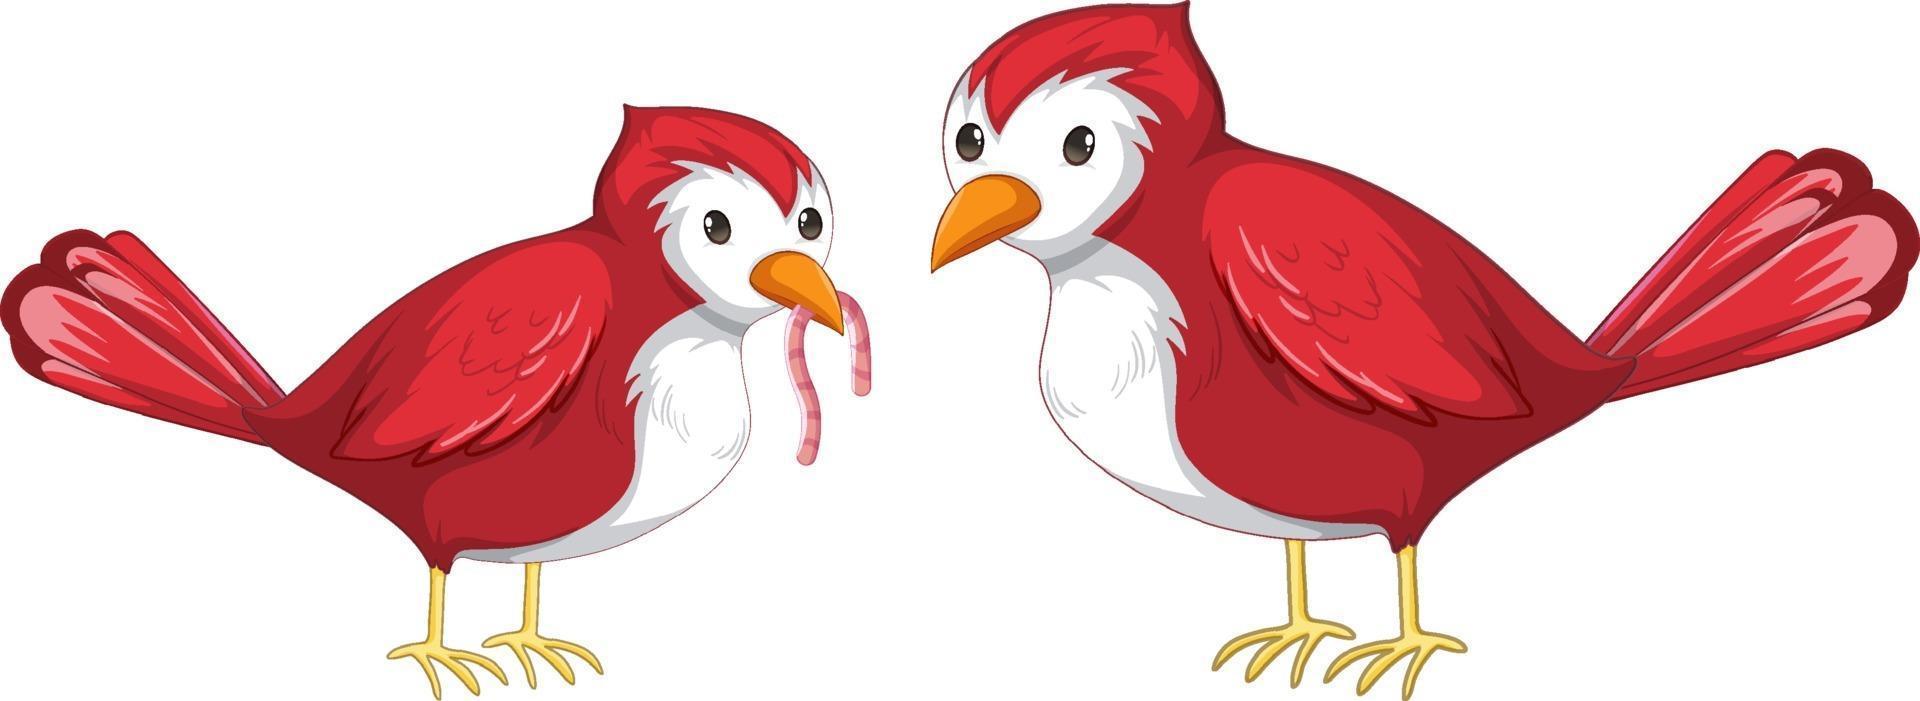 Two red bird catching worm in cartoon style isolated vector